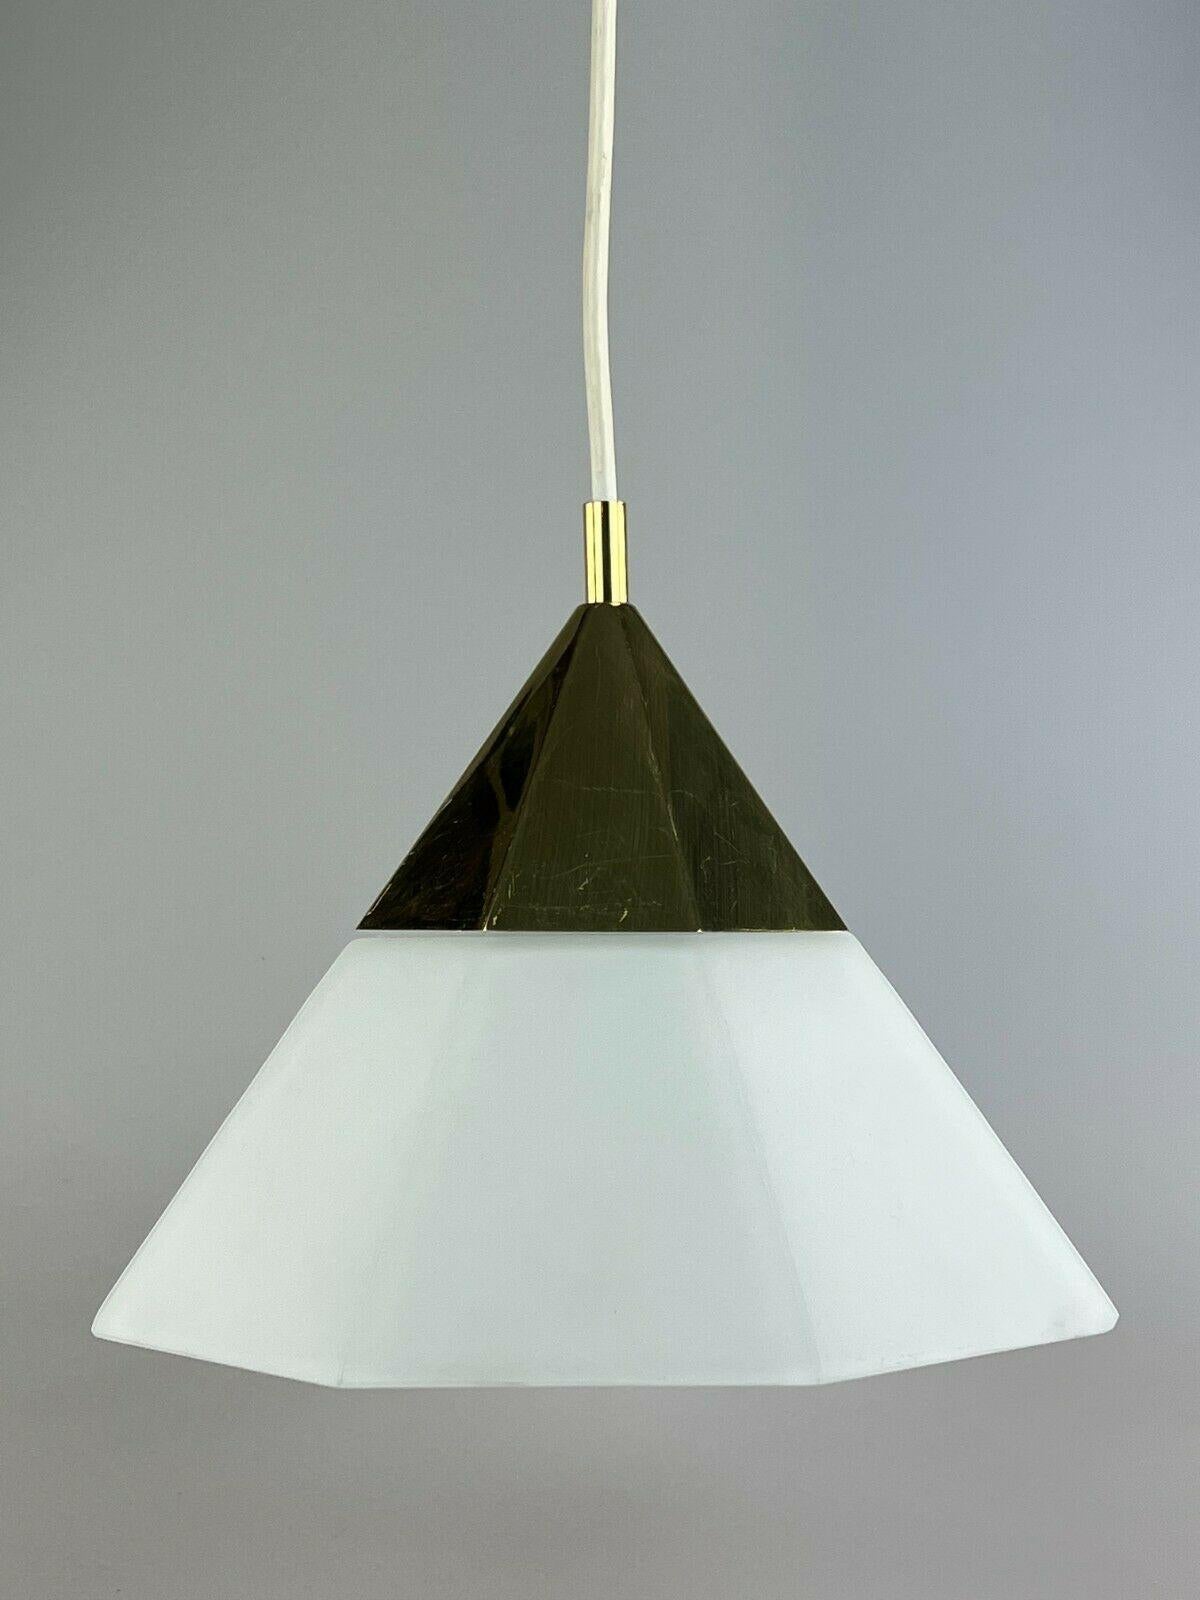 60s 70s lamp light ceiling lamp Limburg glass space age design 60s 70s

Object: ceiling lamp

Manufacturer: Glashütte Limburg

Condition: good

Age: around 1960-1970

Dimensions:

Diameter = 30cm
Height = 24cm

Other notes:

The